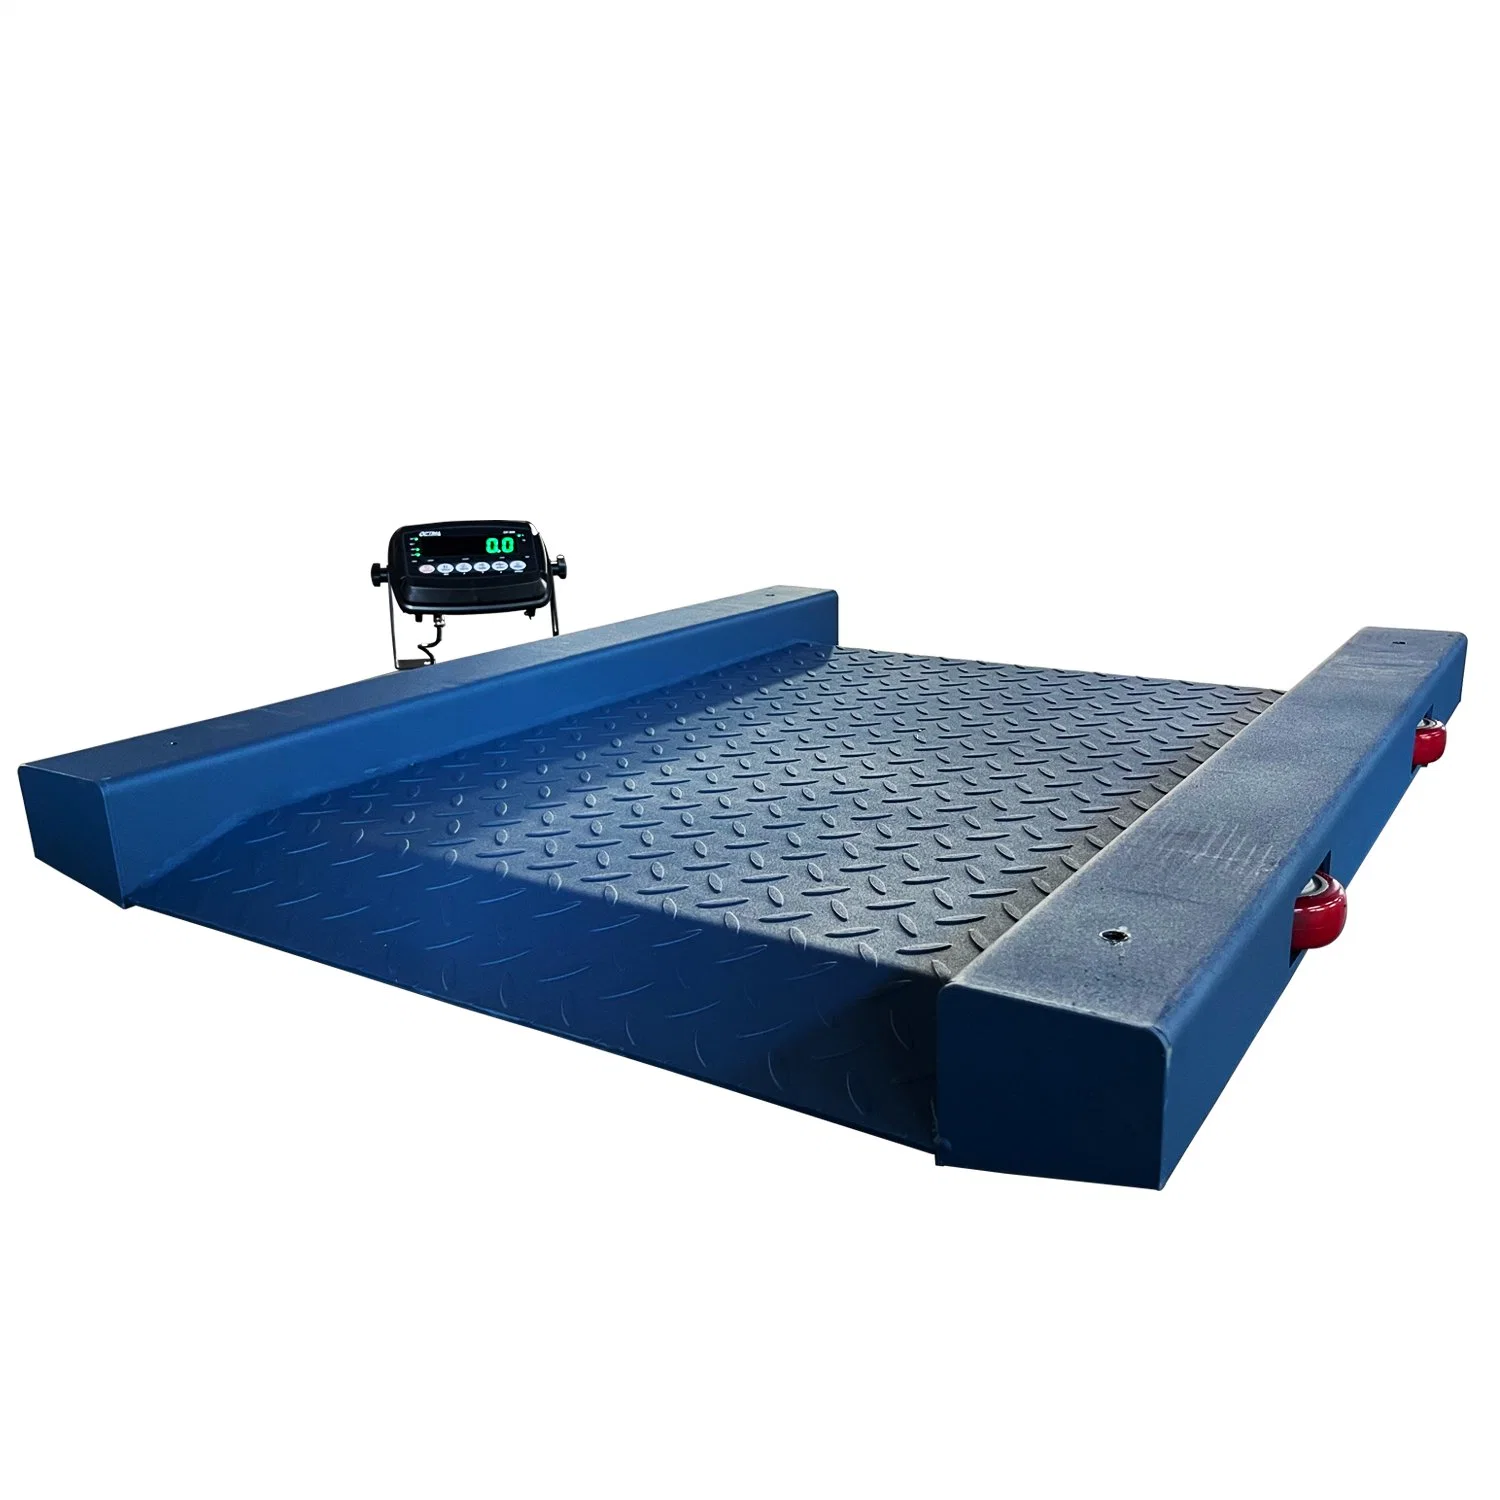 High Precision Low Profile Floor Scale Weighing Scale with Ramps